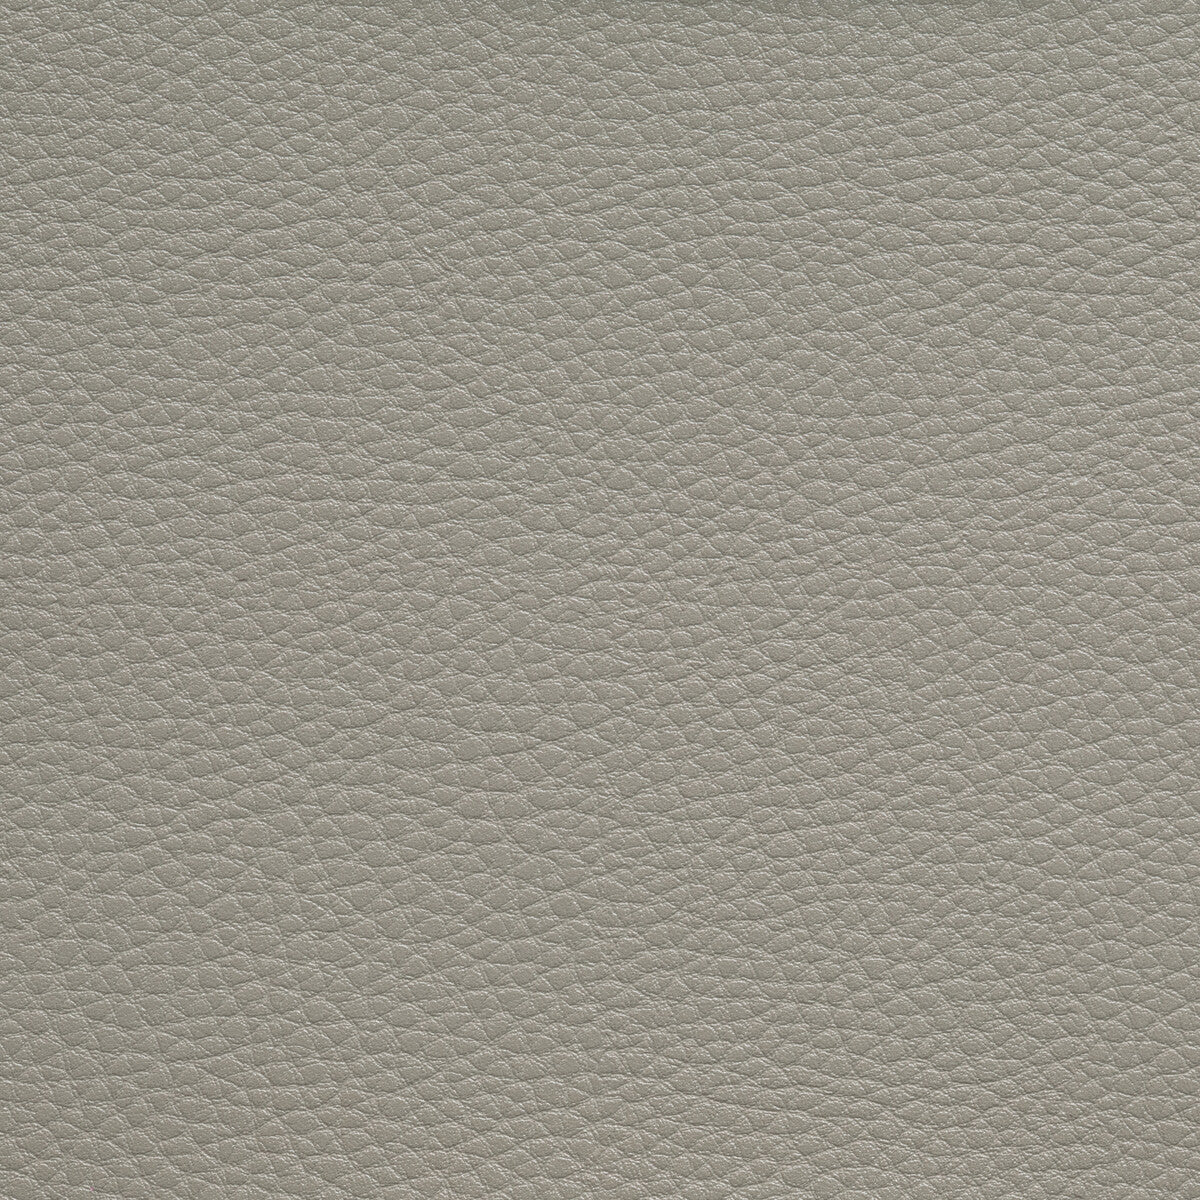 Boone fabric in chinchilla color - pattern BOONE.1611.0 - by Kravet Contract in the Foundations / Value collection